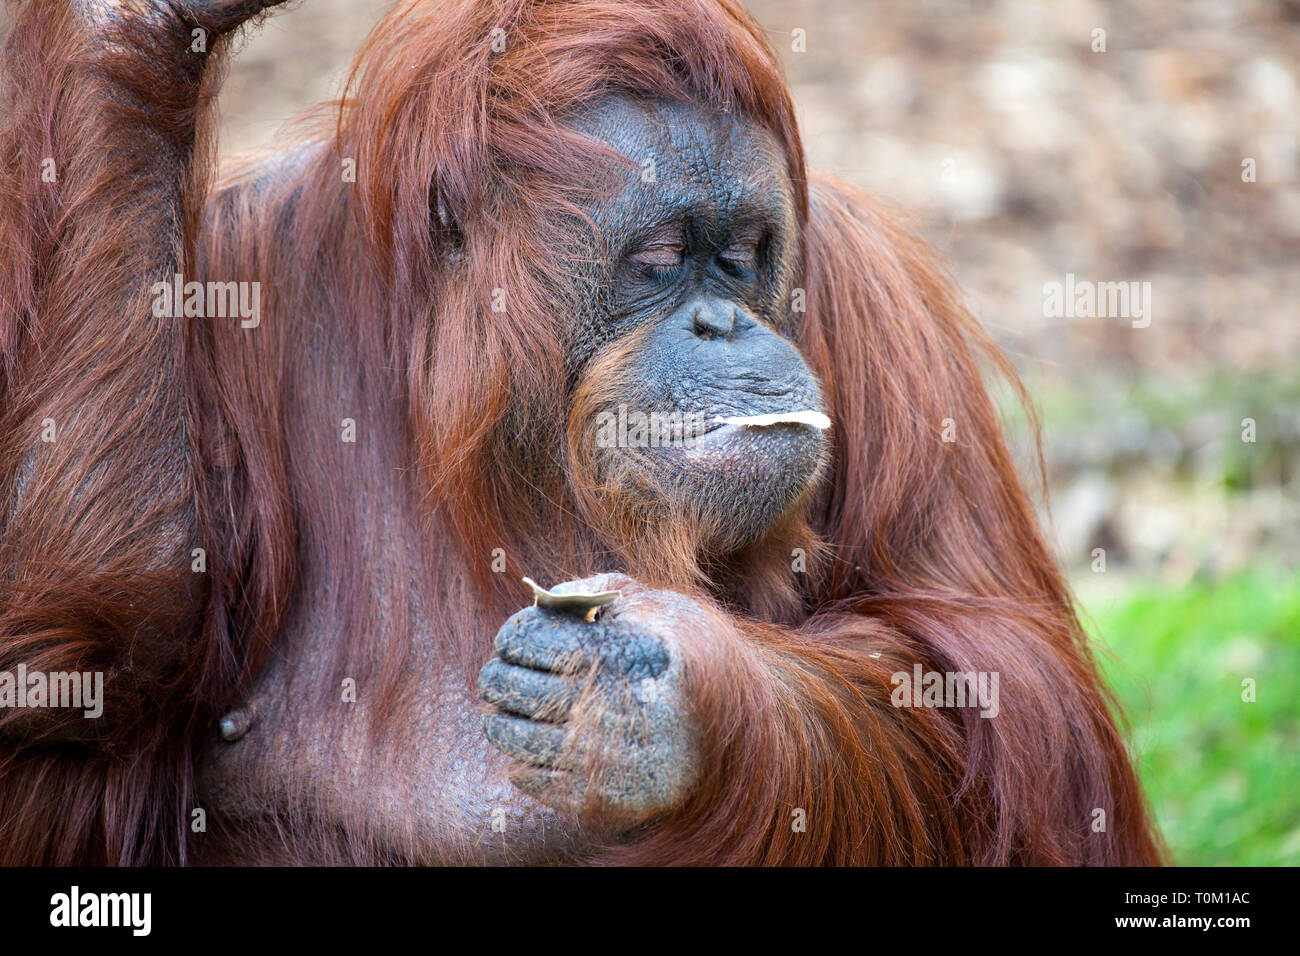 Orangutan With A Leaf In His Mouth Stock Photo